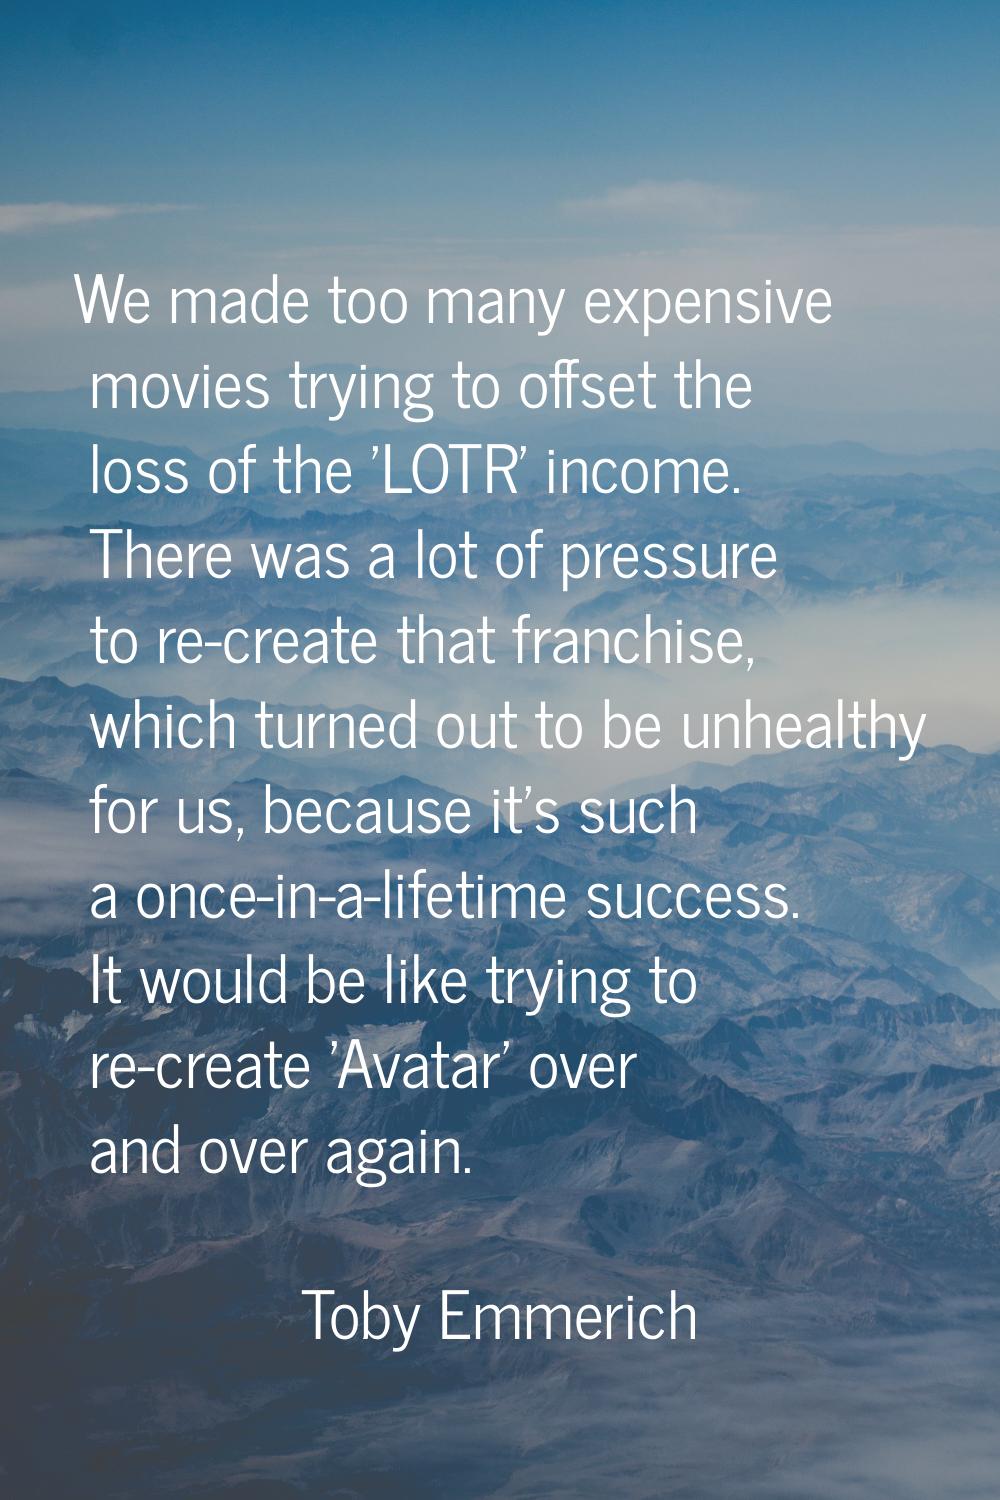 We made too many expensive movies trying to offset the loss of the 'LOTR' income. There was a lot o